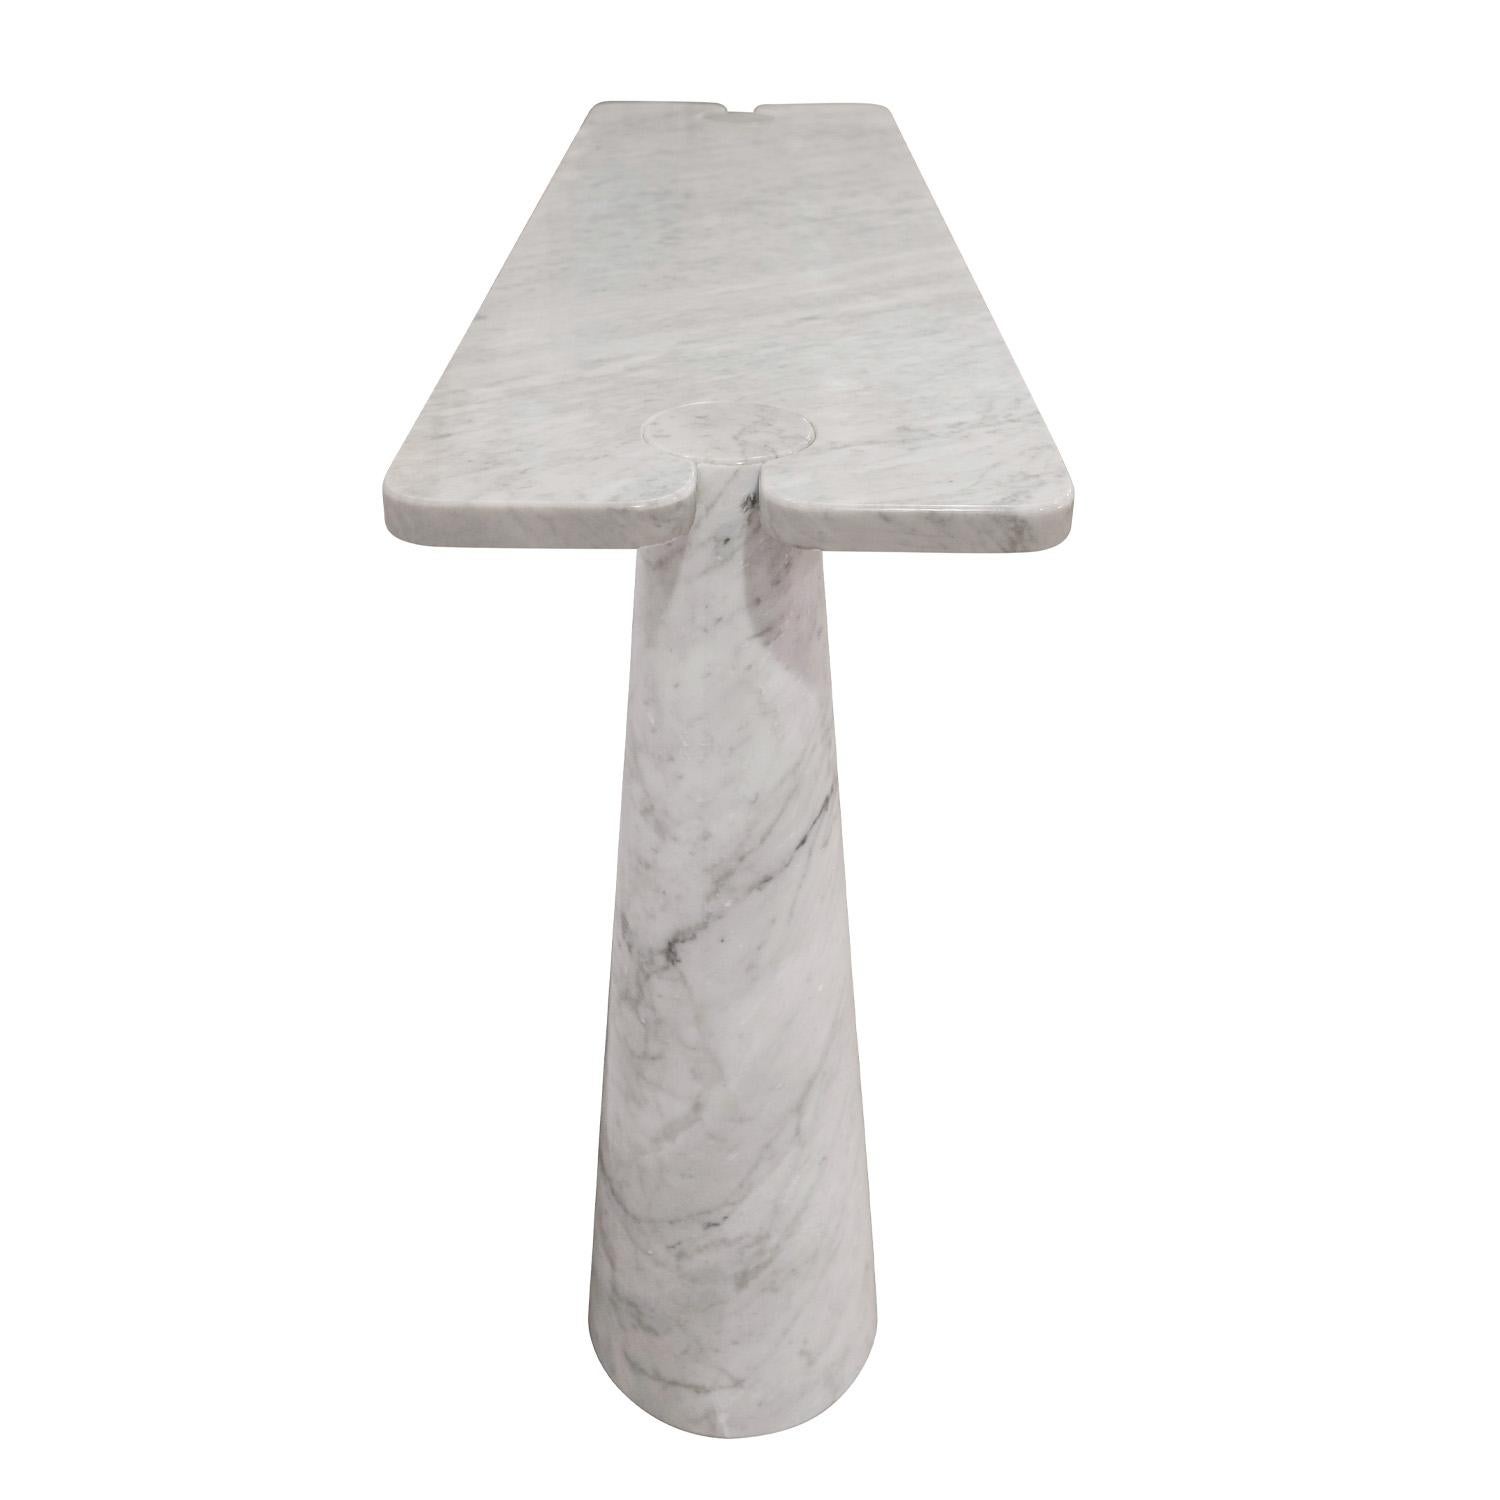 Italian Angelo Mangiarotti Eros Collection Console Table in Polished White Marble 1970s